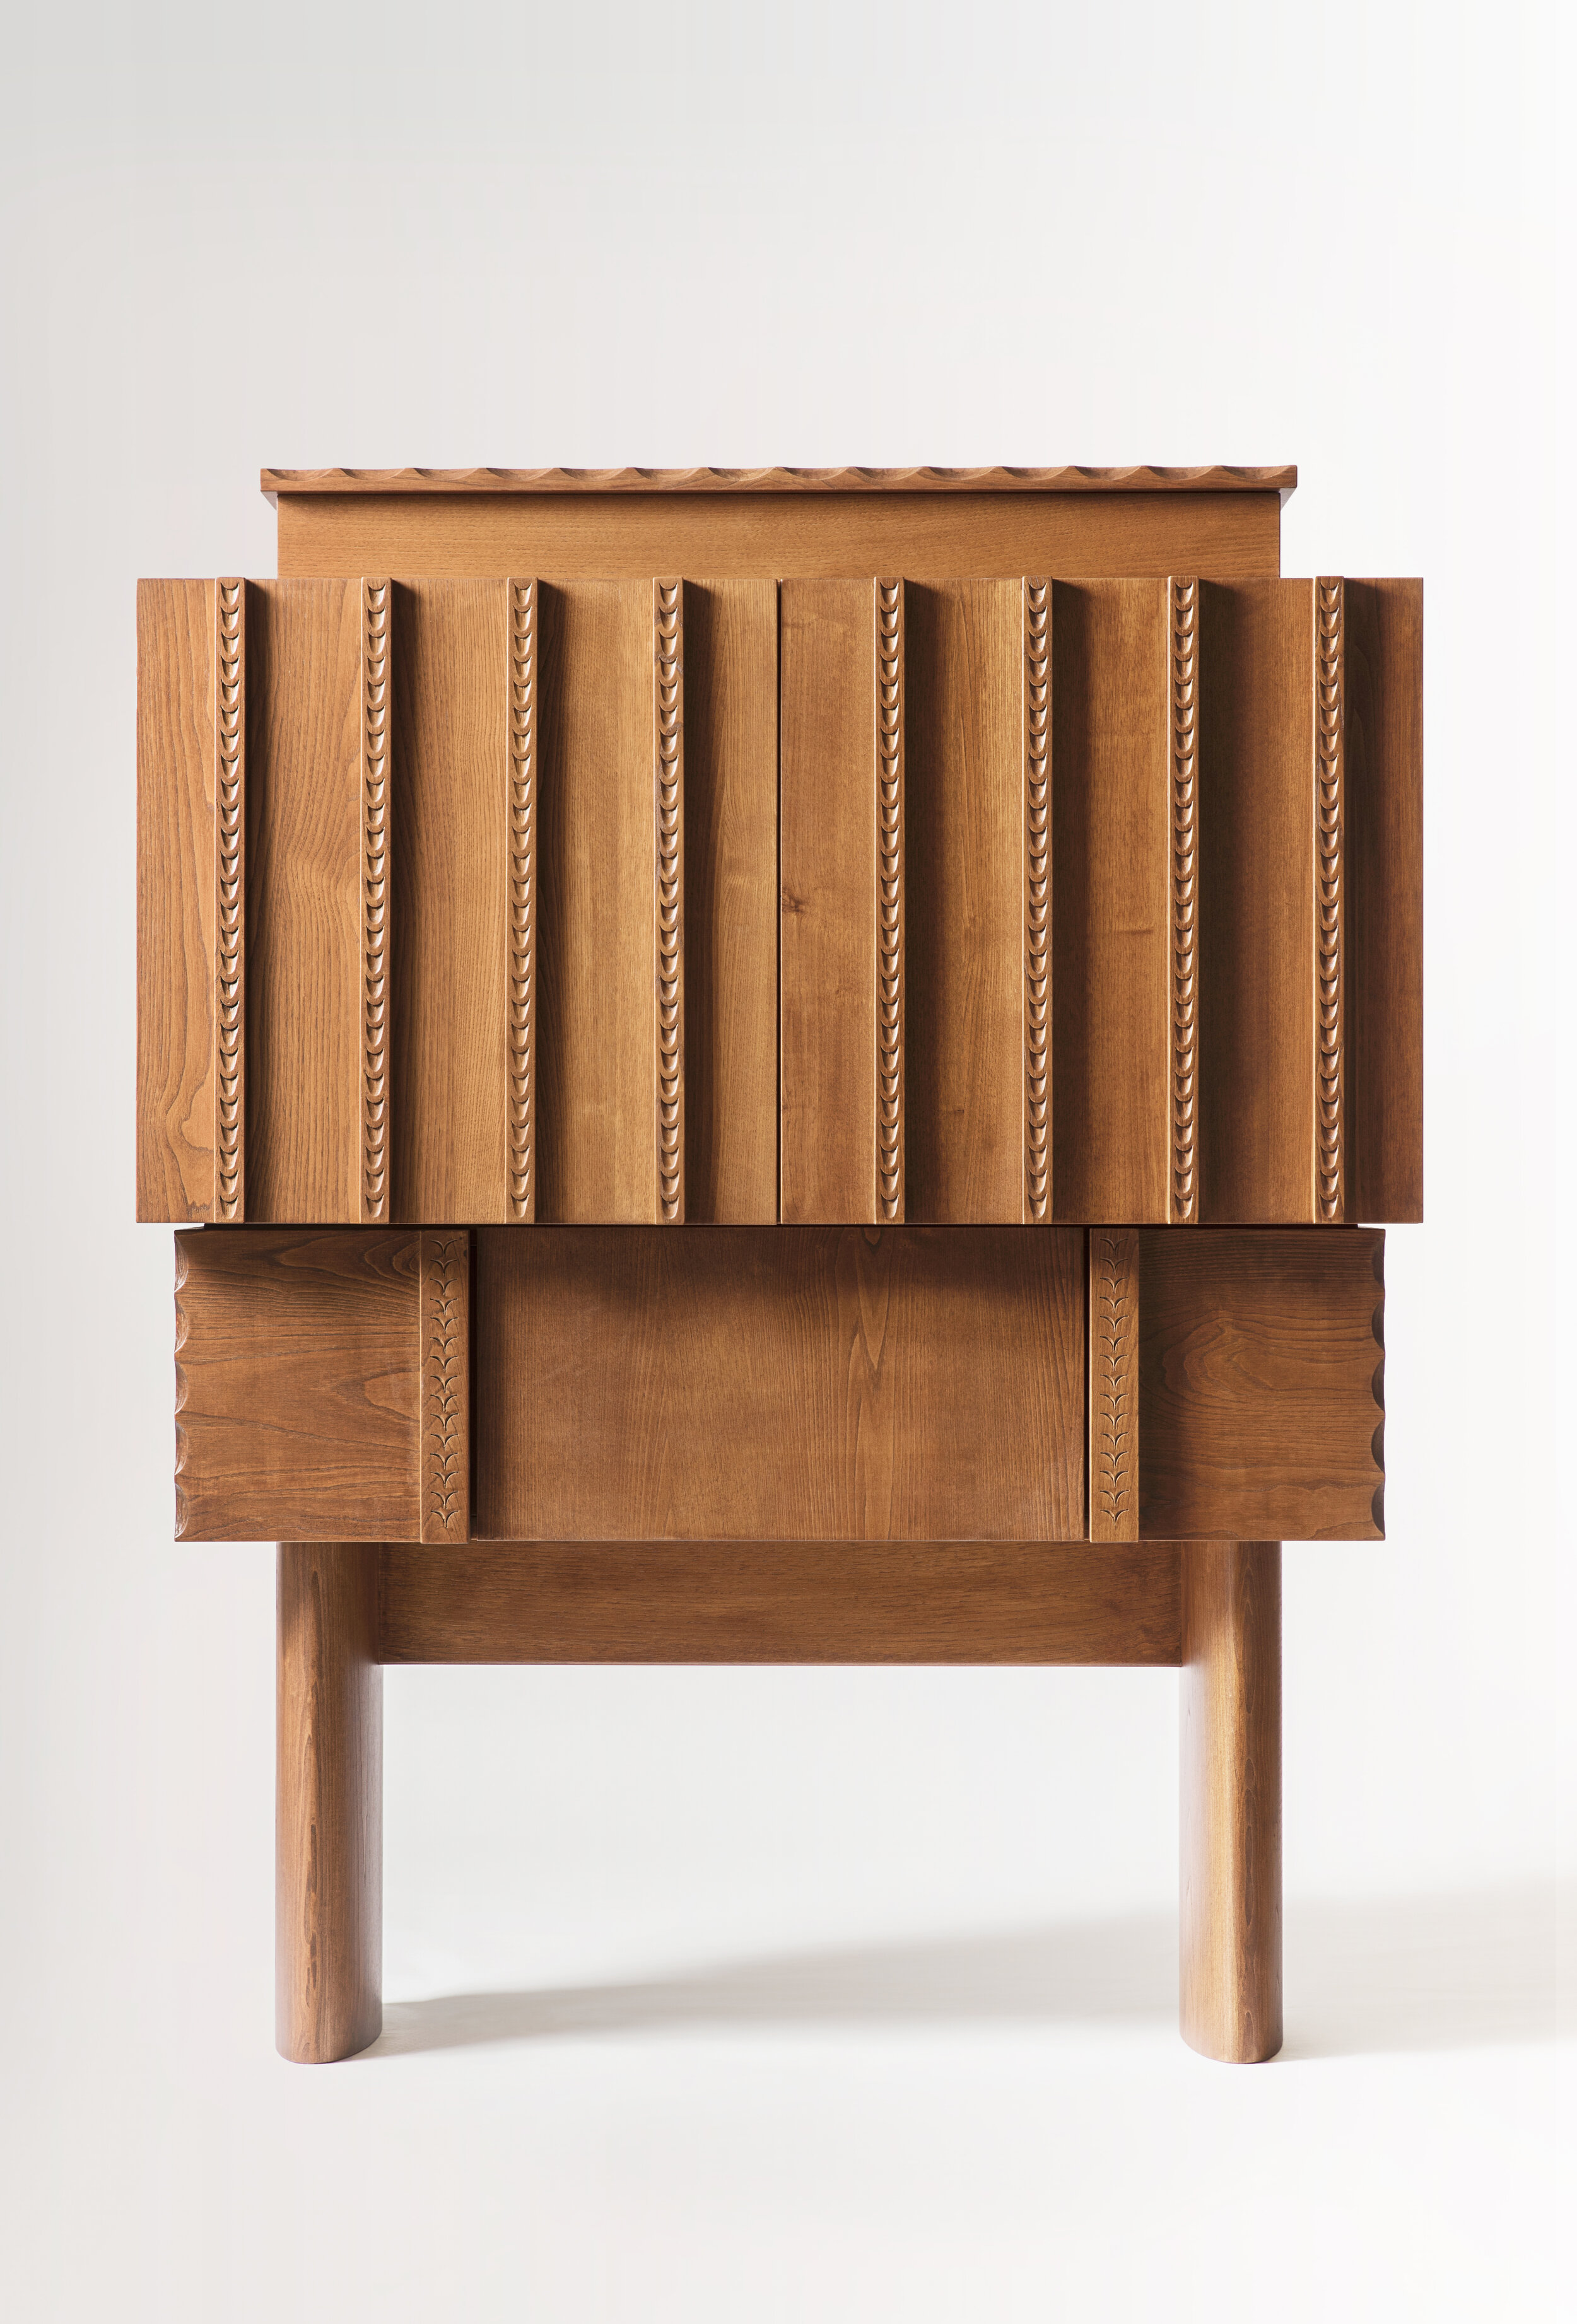 Ancas Sideboard, designed by Chiara Andreatti, made by Pierpaolo Mandis for Pretziada_front.jpg